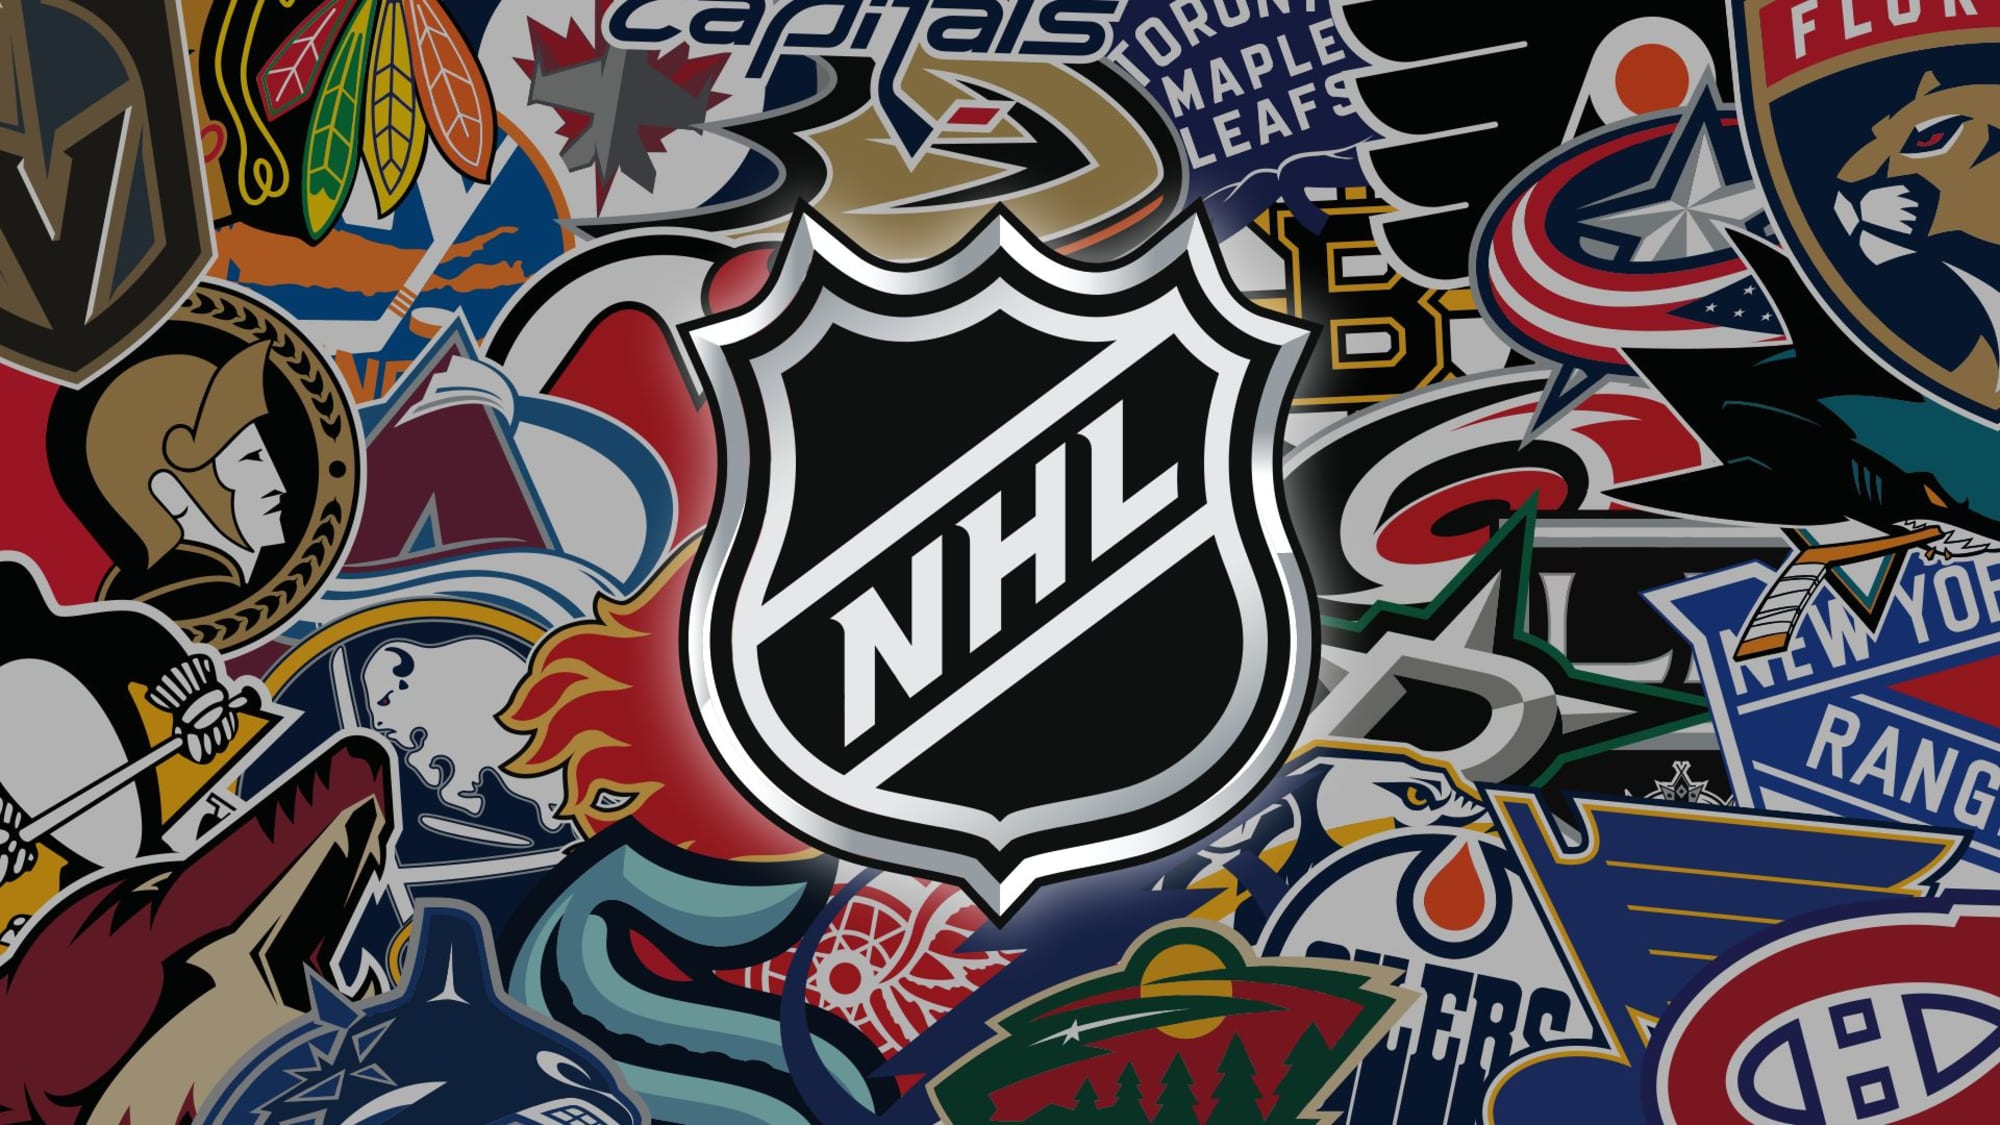 I'm making wallpapers for every nhl franchise. For my first one I